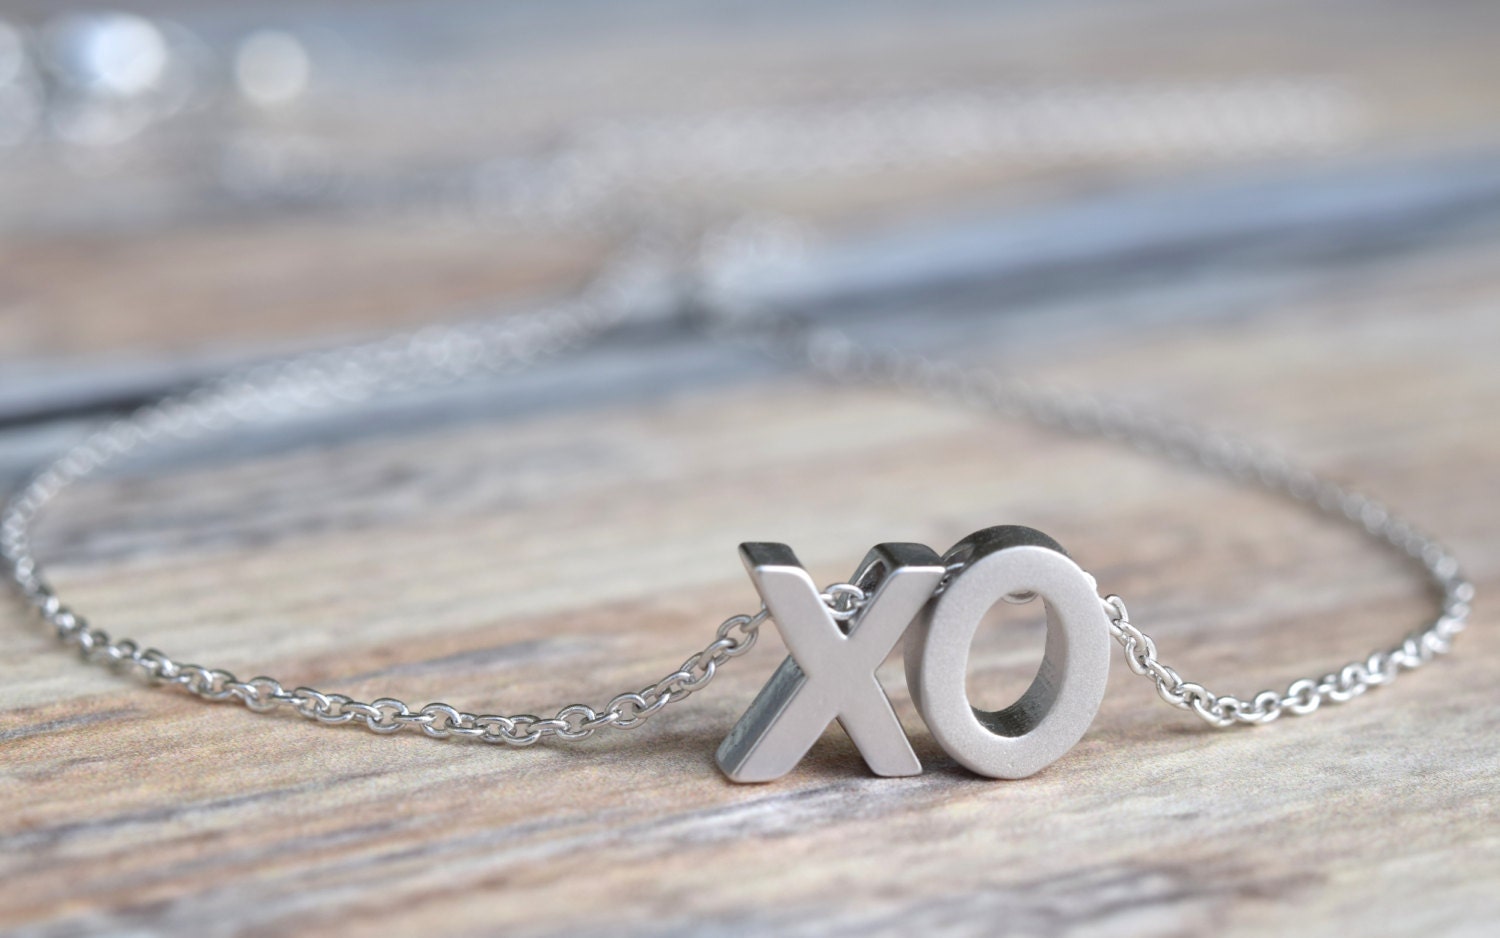 XO Necklace, Hug and Kiss Necklace, Love Necklace, XO Pendant, Layering Necklace, Anniversary Gift, Gift For Her, Silver Love Necklace